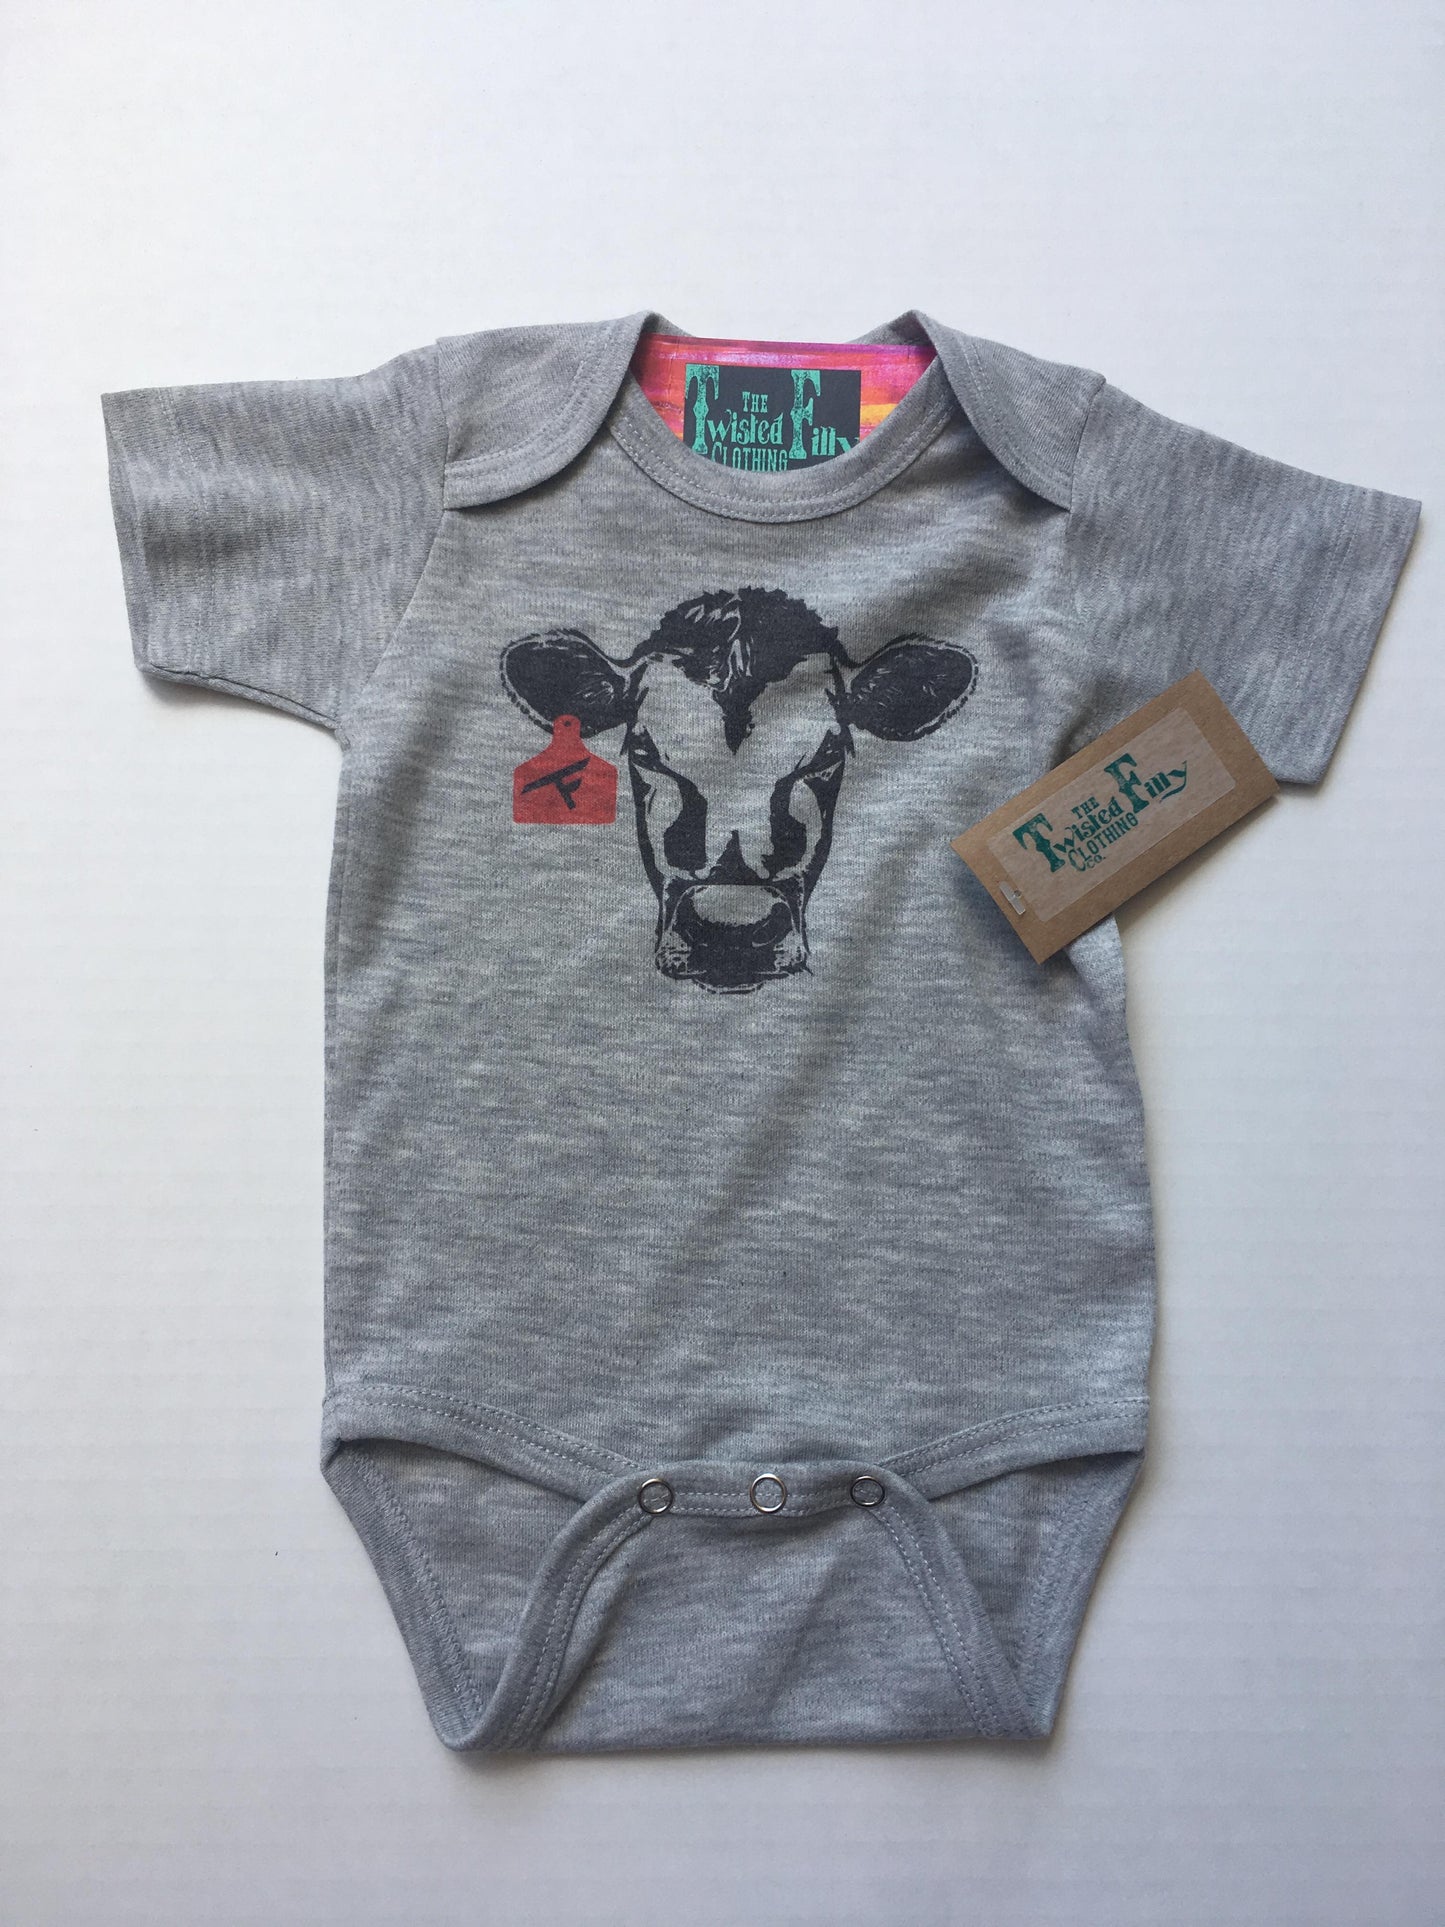 THE TWISTED FILLY CLOTHING CO. Calf W/ Ear Tag - S/S Infant One Piece - Grey